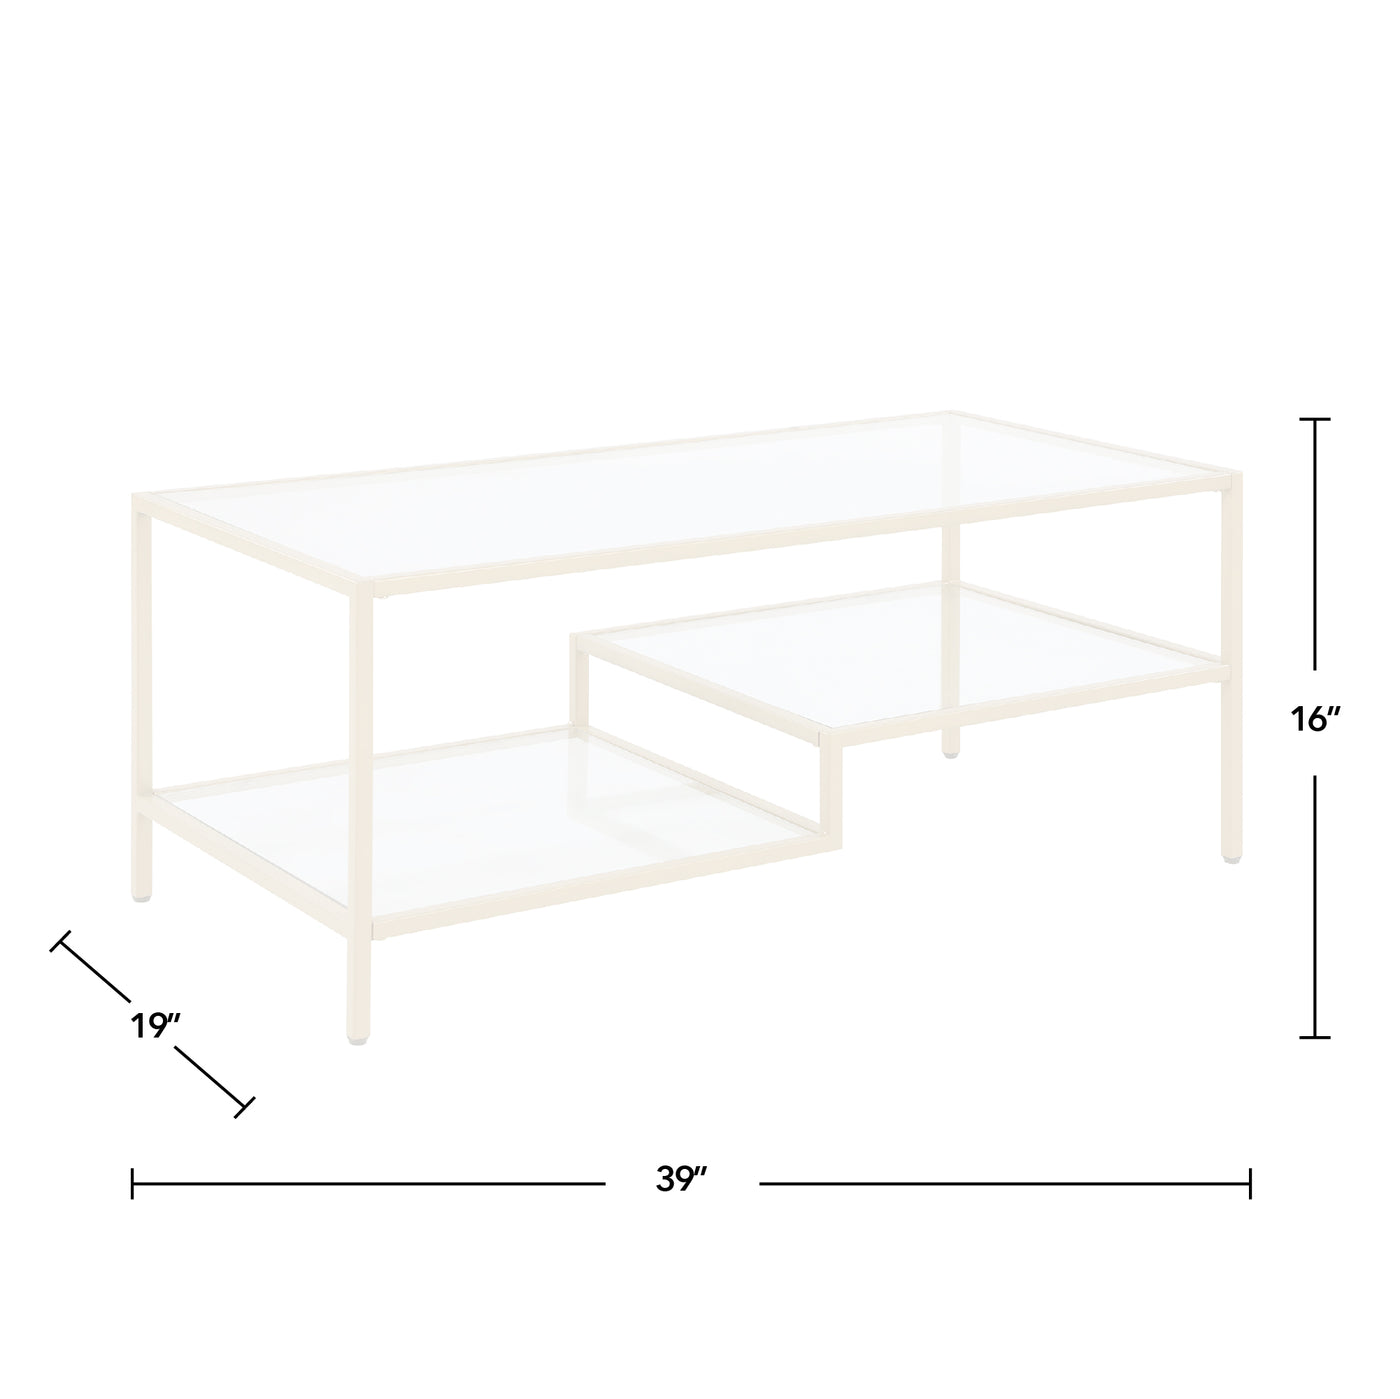 FirsTime & Co. Gold Alexander Coffee Table, Glam Style, Made of Metal